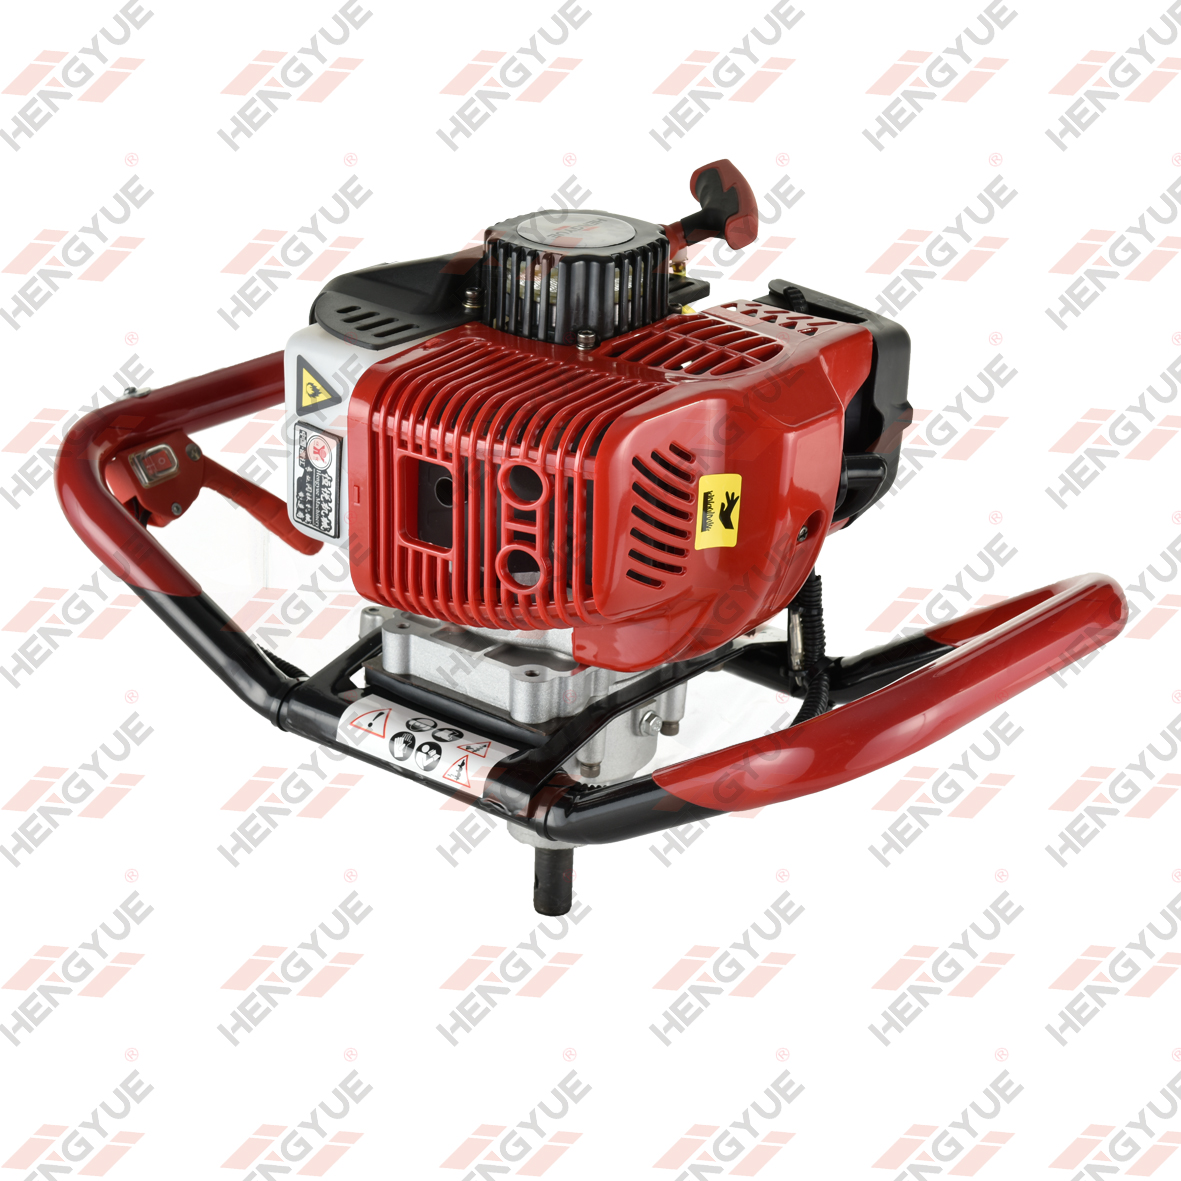 43CC Hand Held Earth Auger Earth Auger Drilling Machine